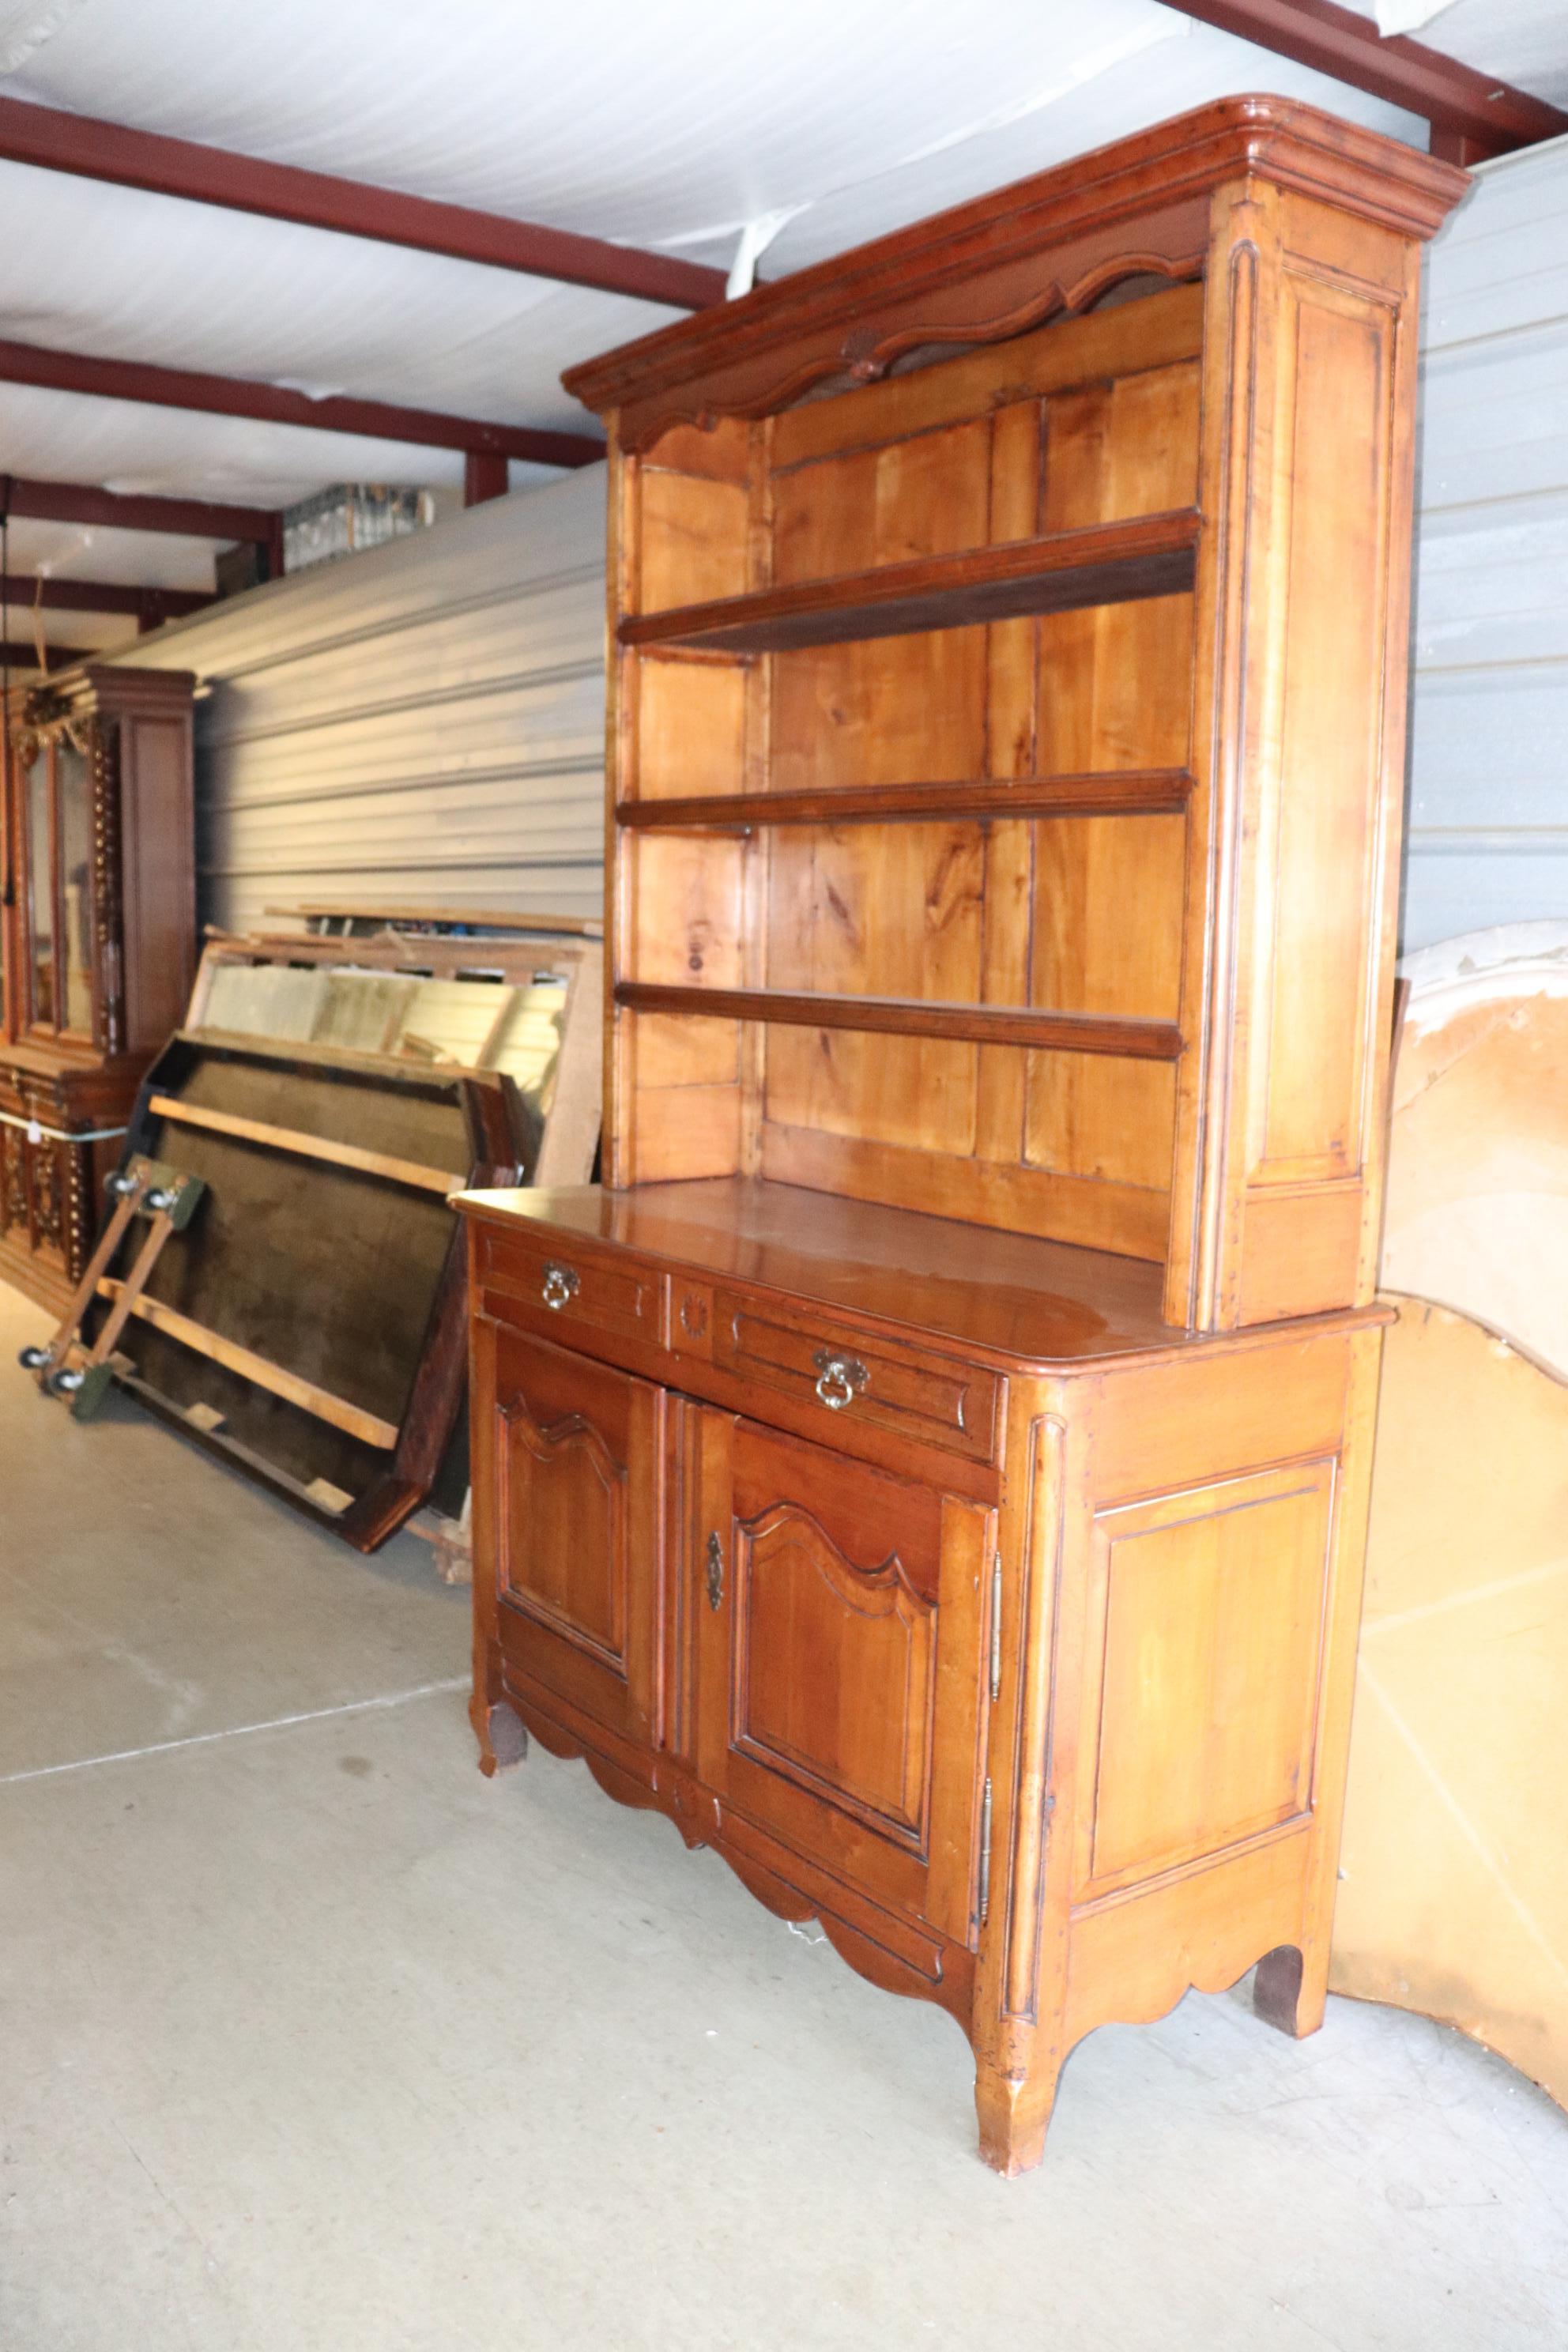 Hand-Made Walnut French Provincial Auffray or Don Ruseau Jelly Cupboard In Good Condition For Sale In Swedesboro, NJ